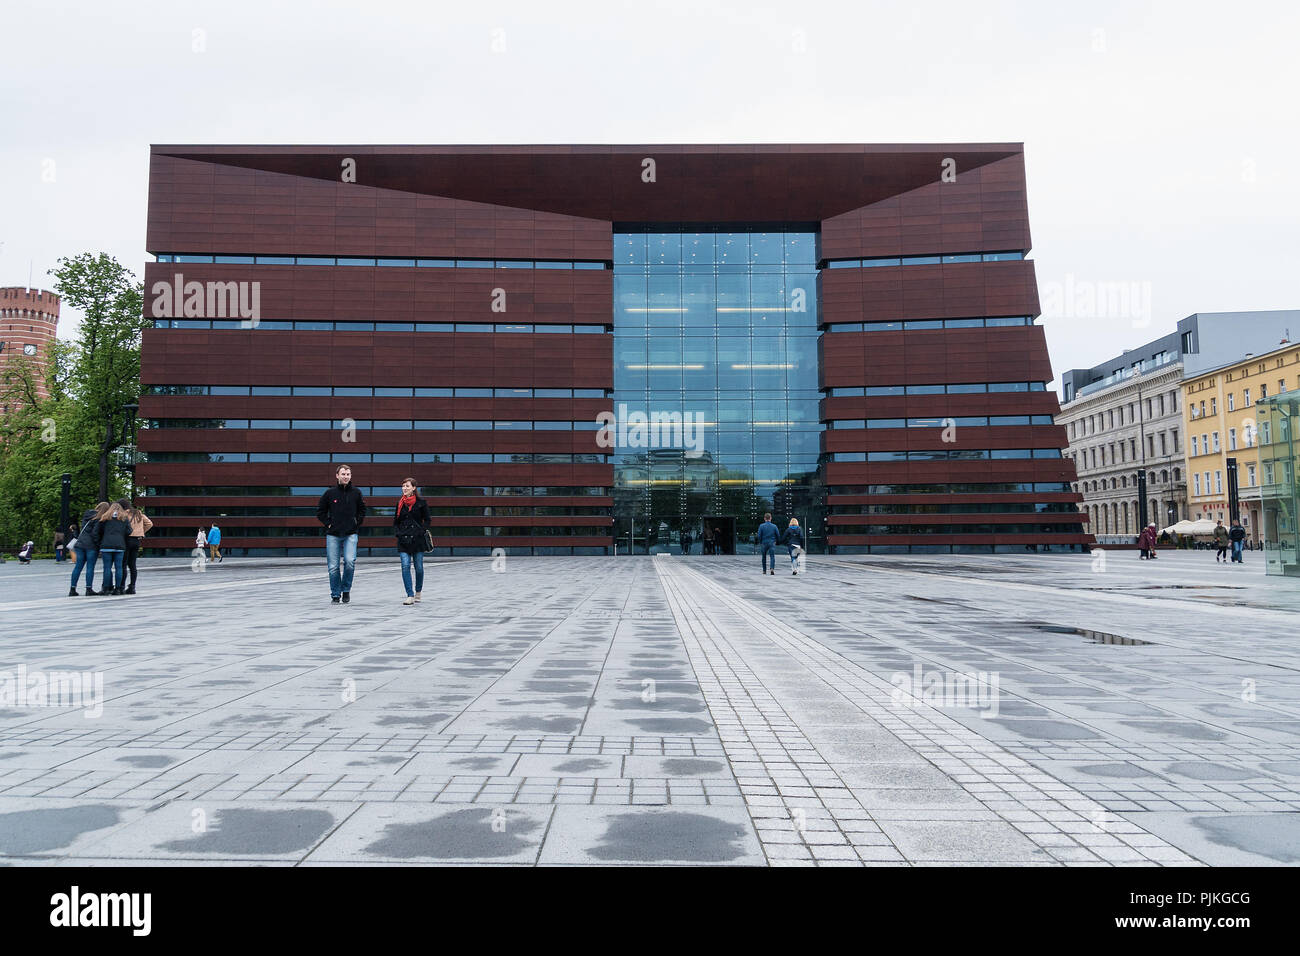 Poland, Wroclaw, National Forum of Music, modern architecture Stock Photo